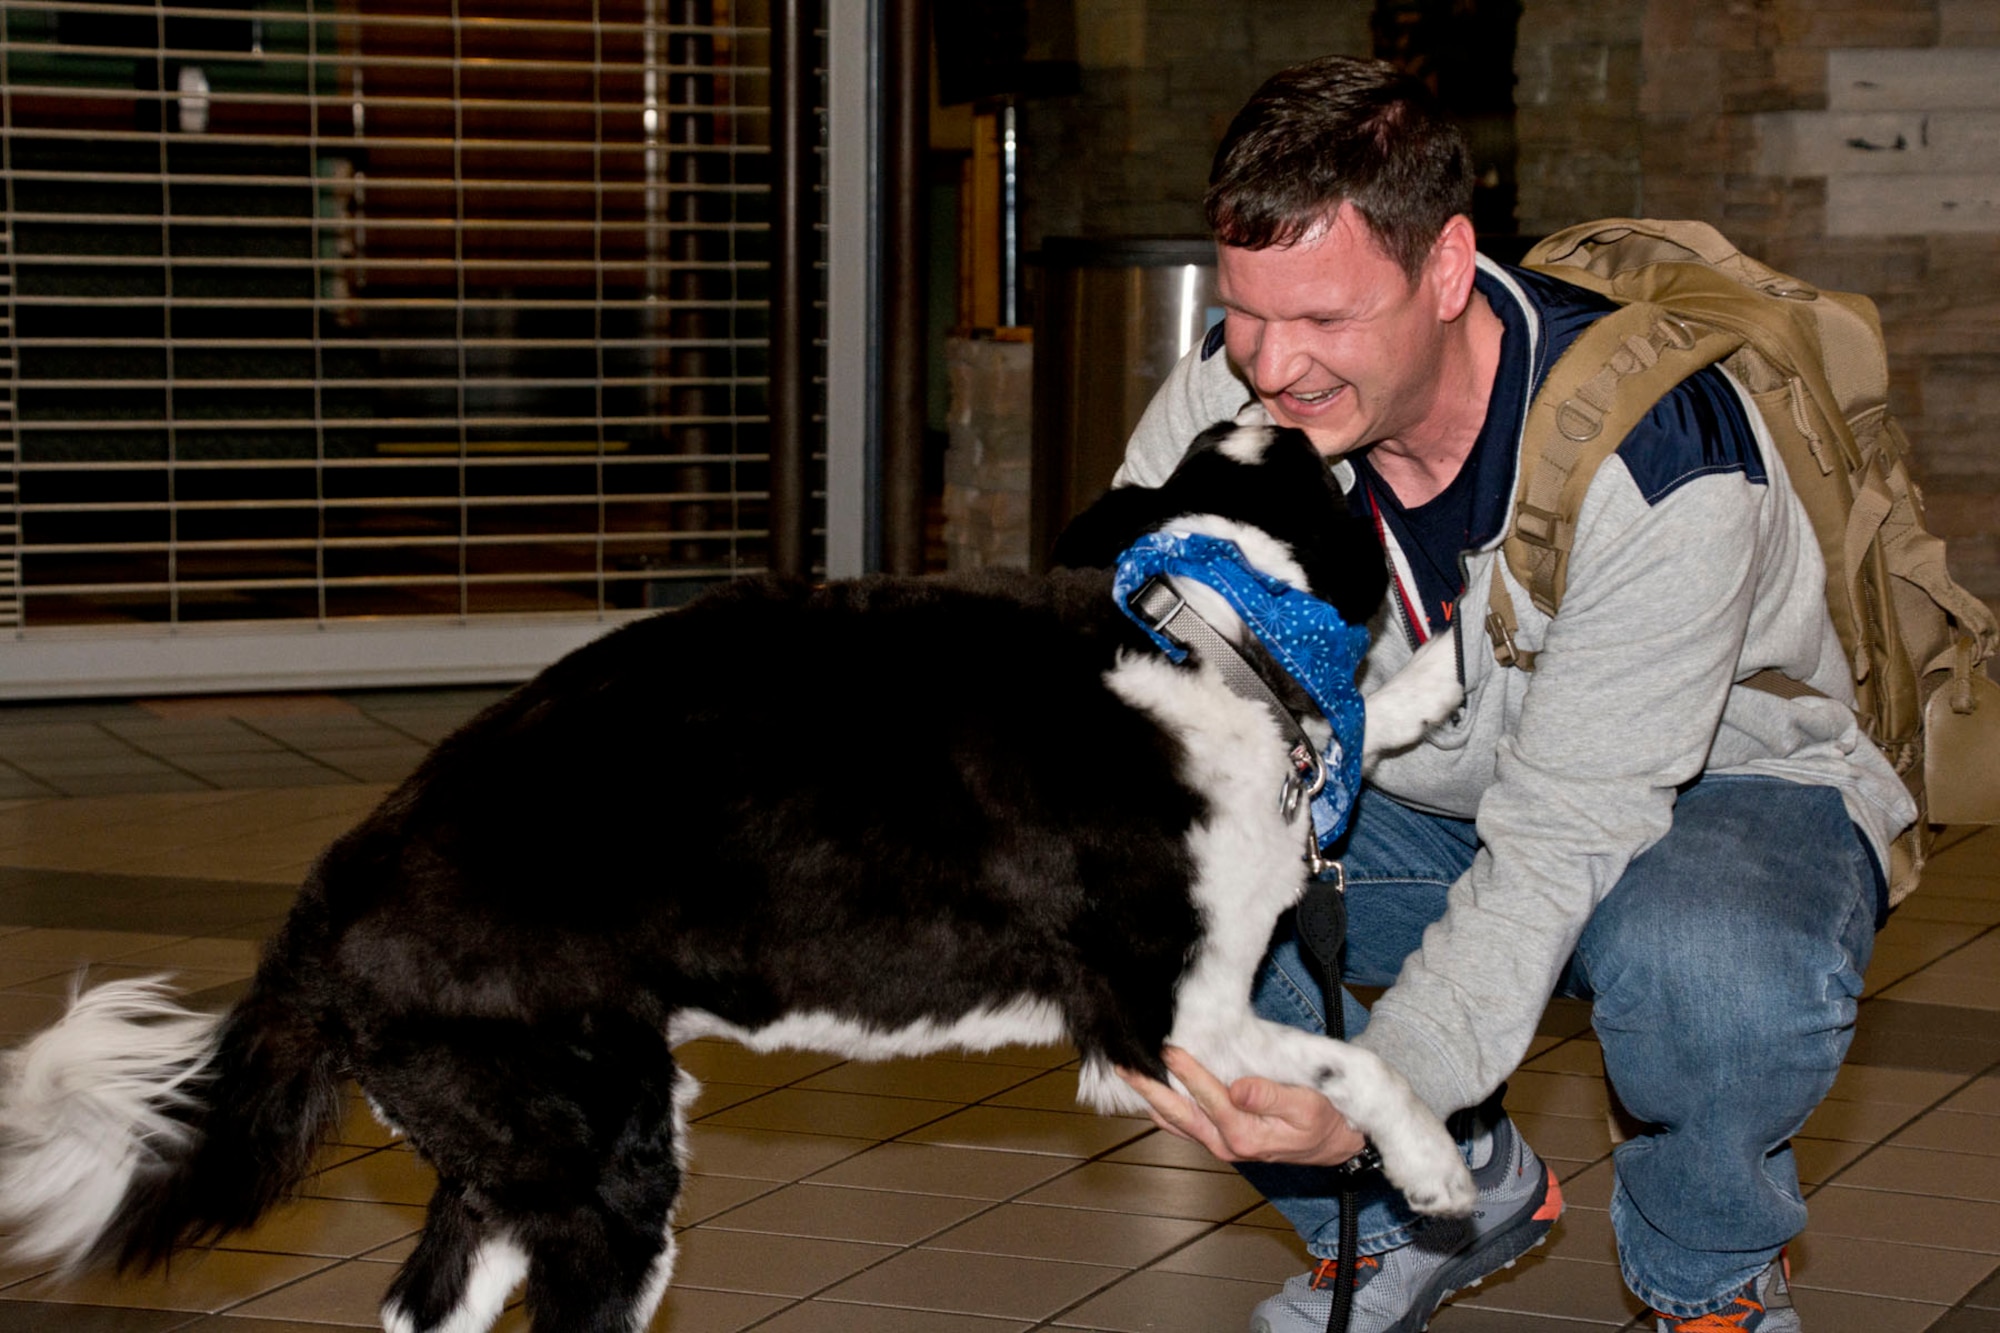 U.S. Air Force Reserve Maj. Jason Furcron is greeted by his Border Collie, Ace, at the Bill and Hillary Clinton National airport in Little Rock, Ark., Feb. 25, 2018.